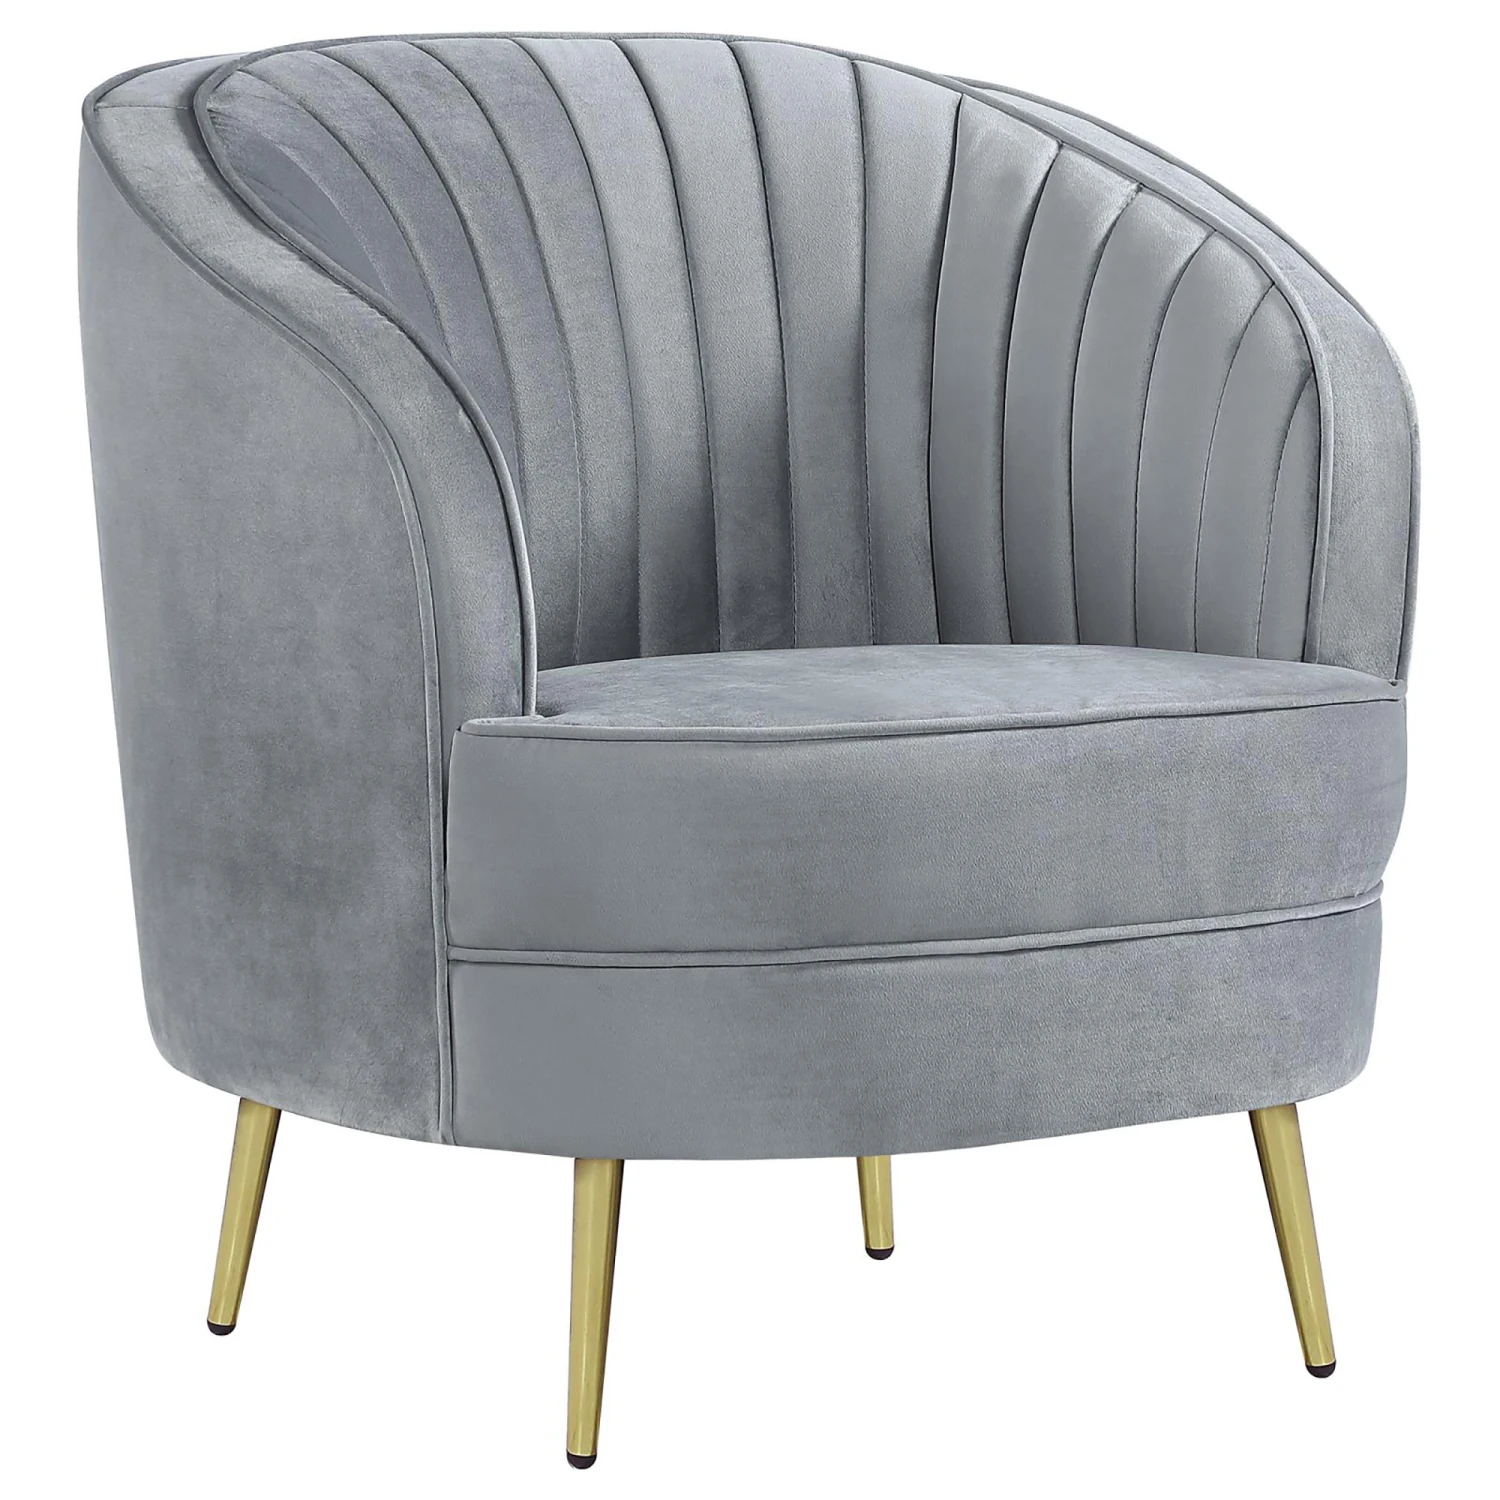 

Elegant Grey and Gold Upholstered Tufted Chair for Luxurious Home Decor, Comfortable Accent Chair with Plush Cushioning and Stur